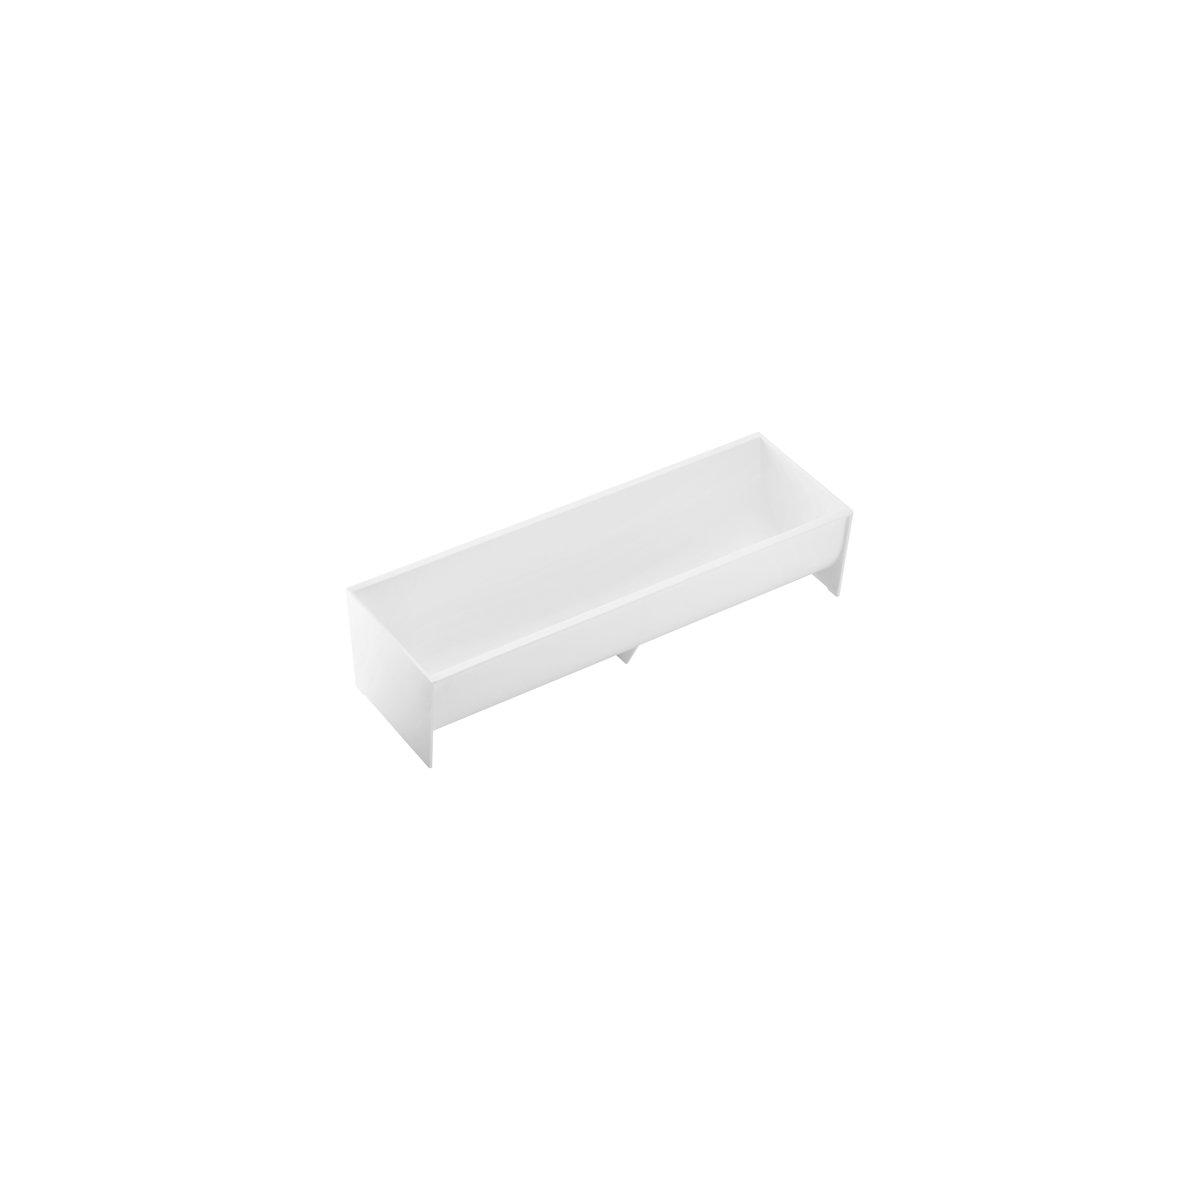 31037 Thermohauser Log Mould 7 Hole 280x85x60 / 35mm Tomkin Australia Hospitality Supplies